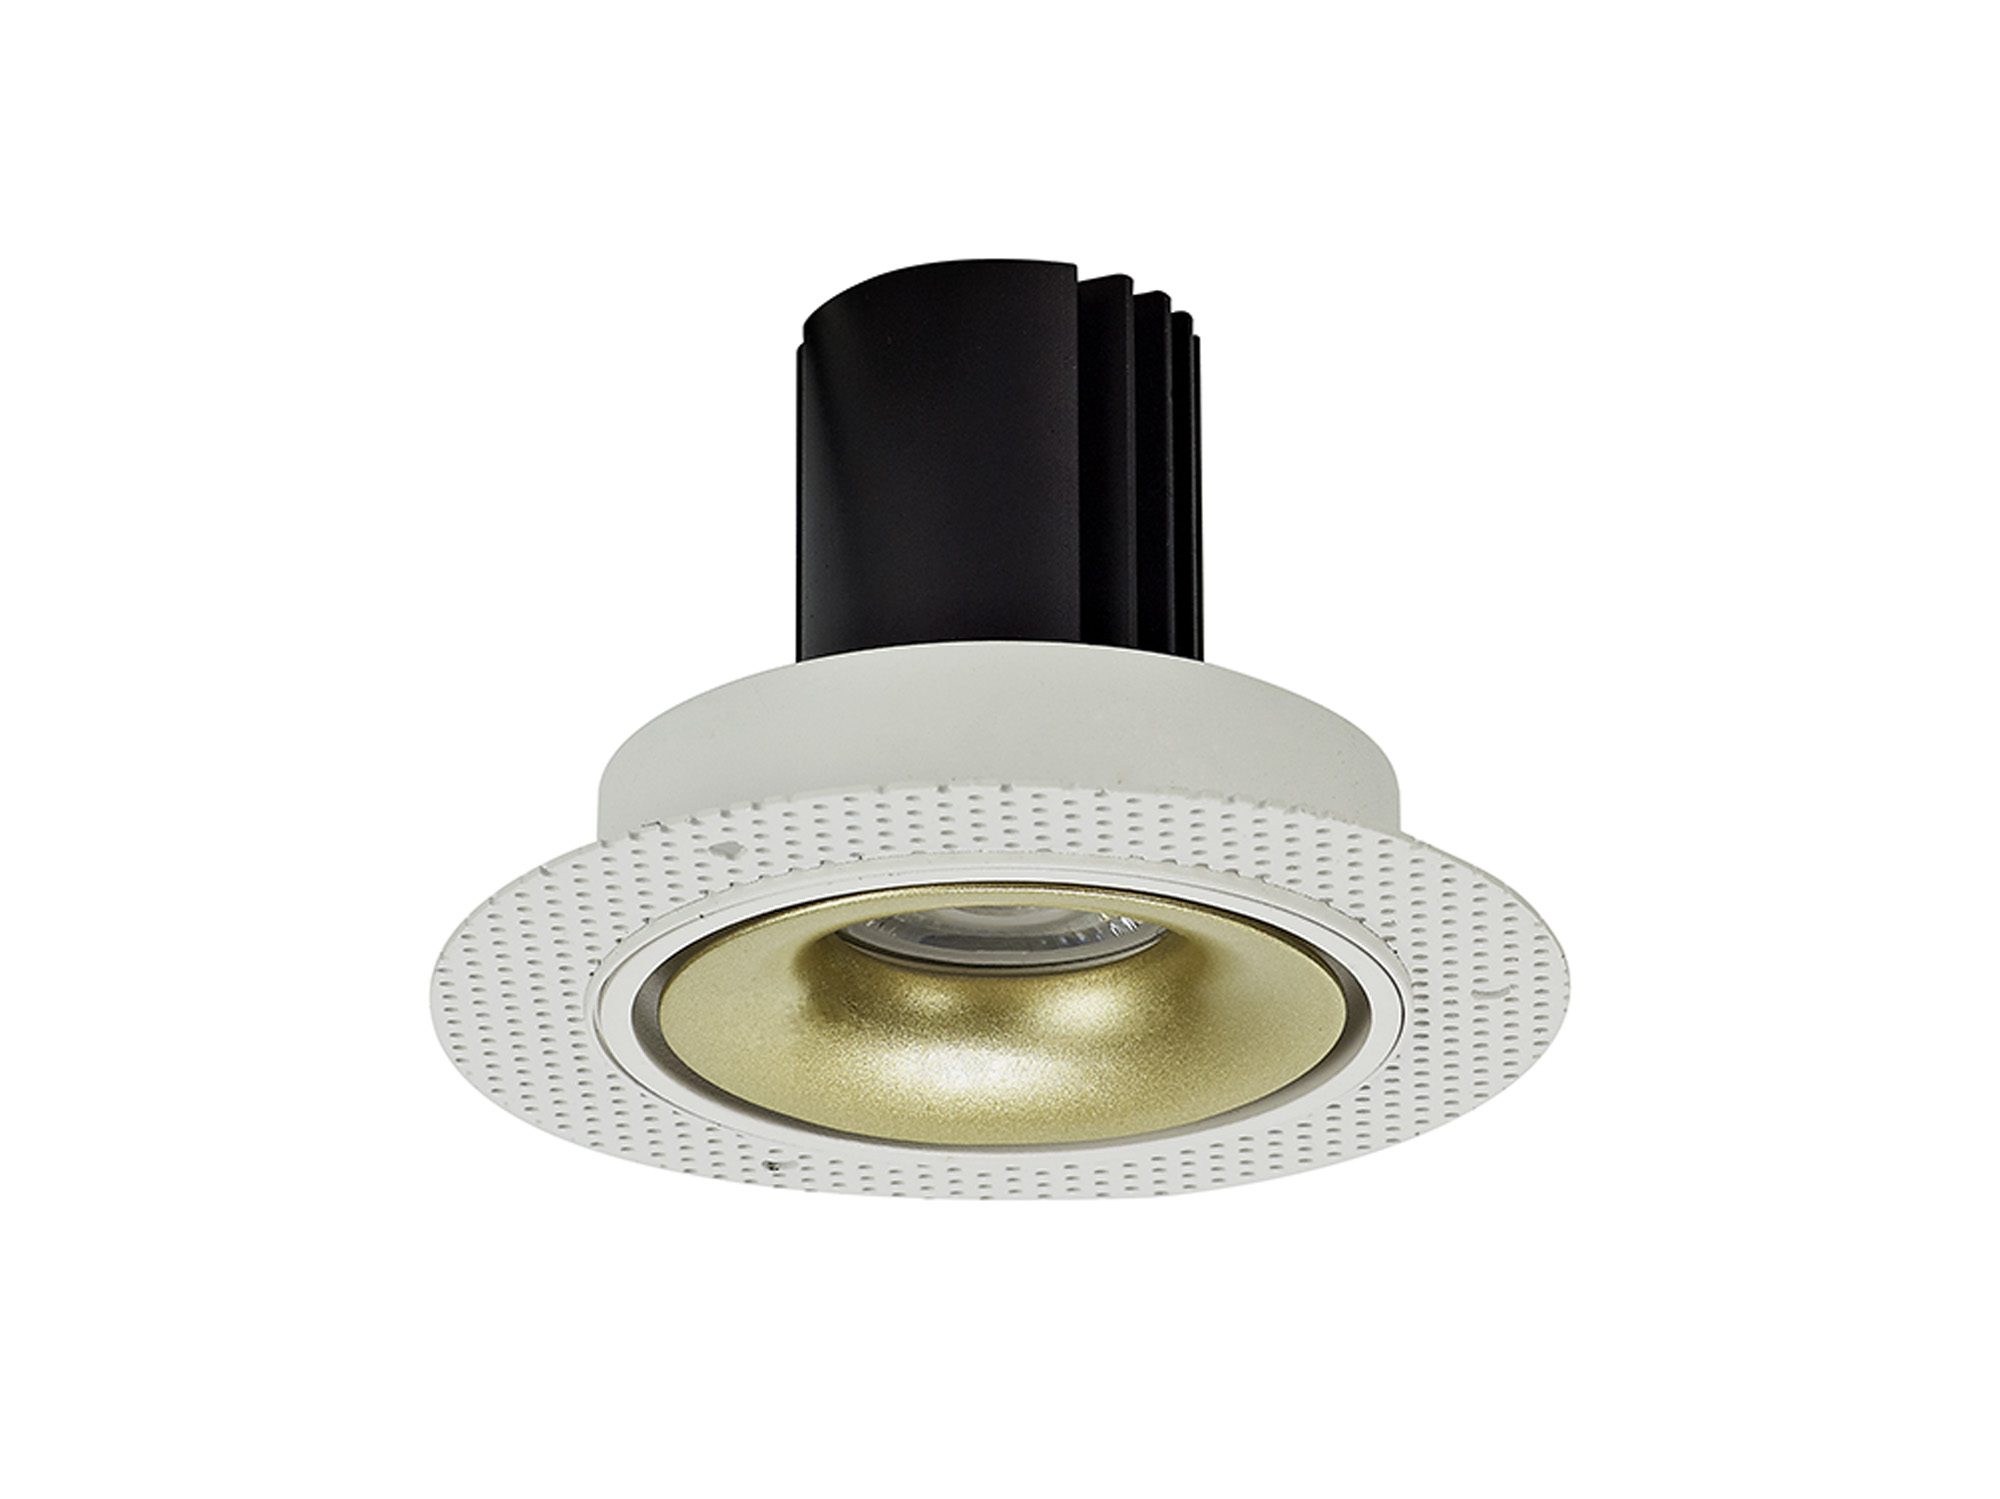 DM202180  Bolor T 12 Tridonic Powered 12W 2700K 1200lm 12° CRI>90 LED Engine White/Gold Trimless Fixed Recessed Spotlight; IP20